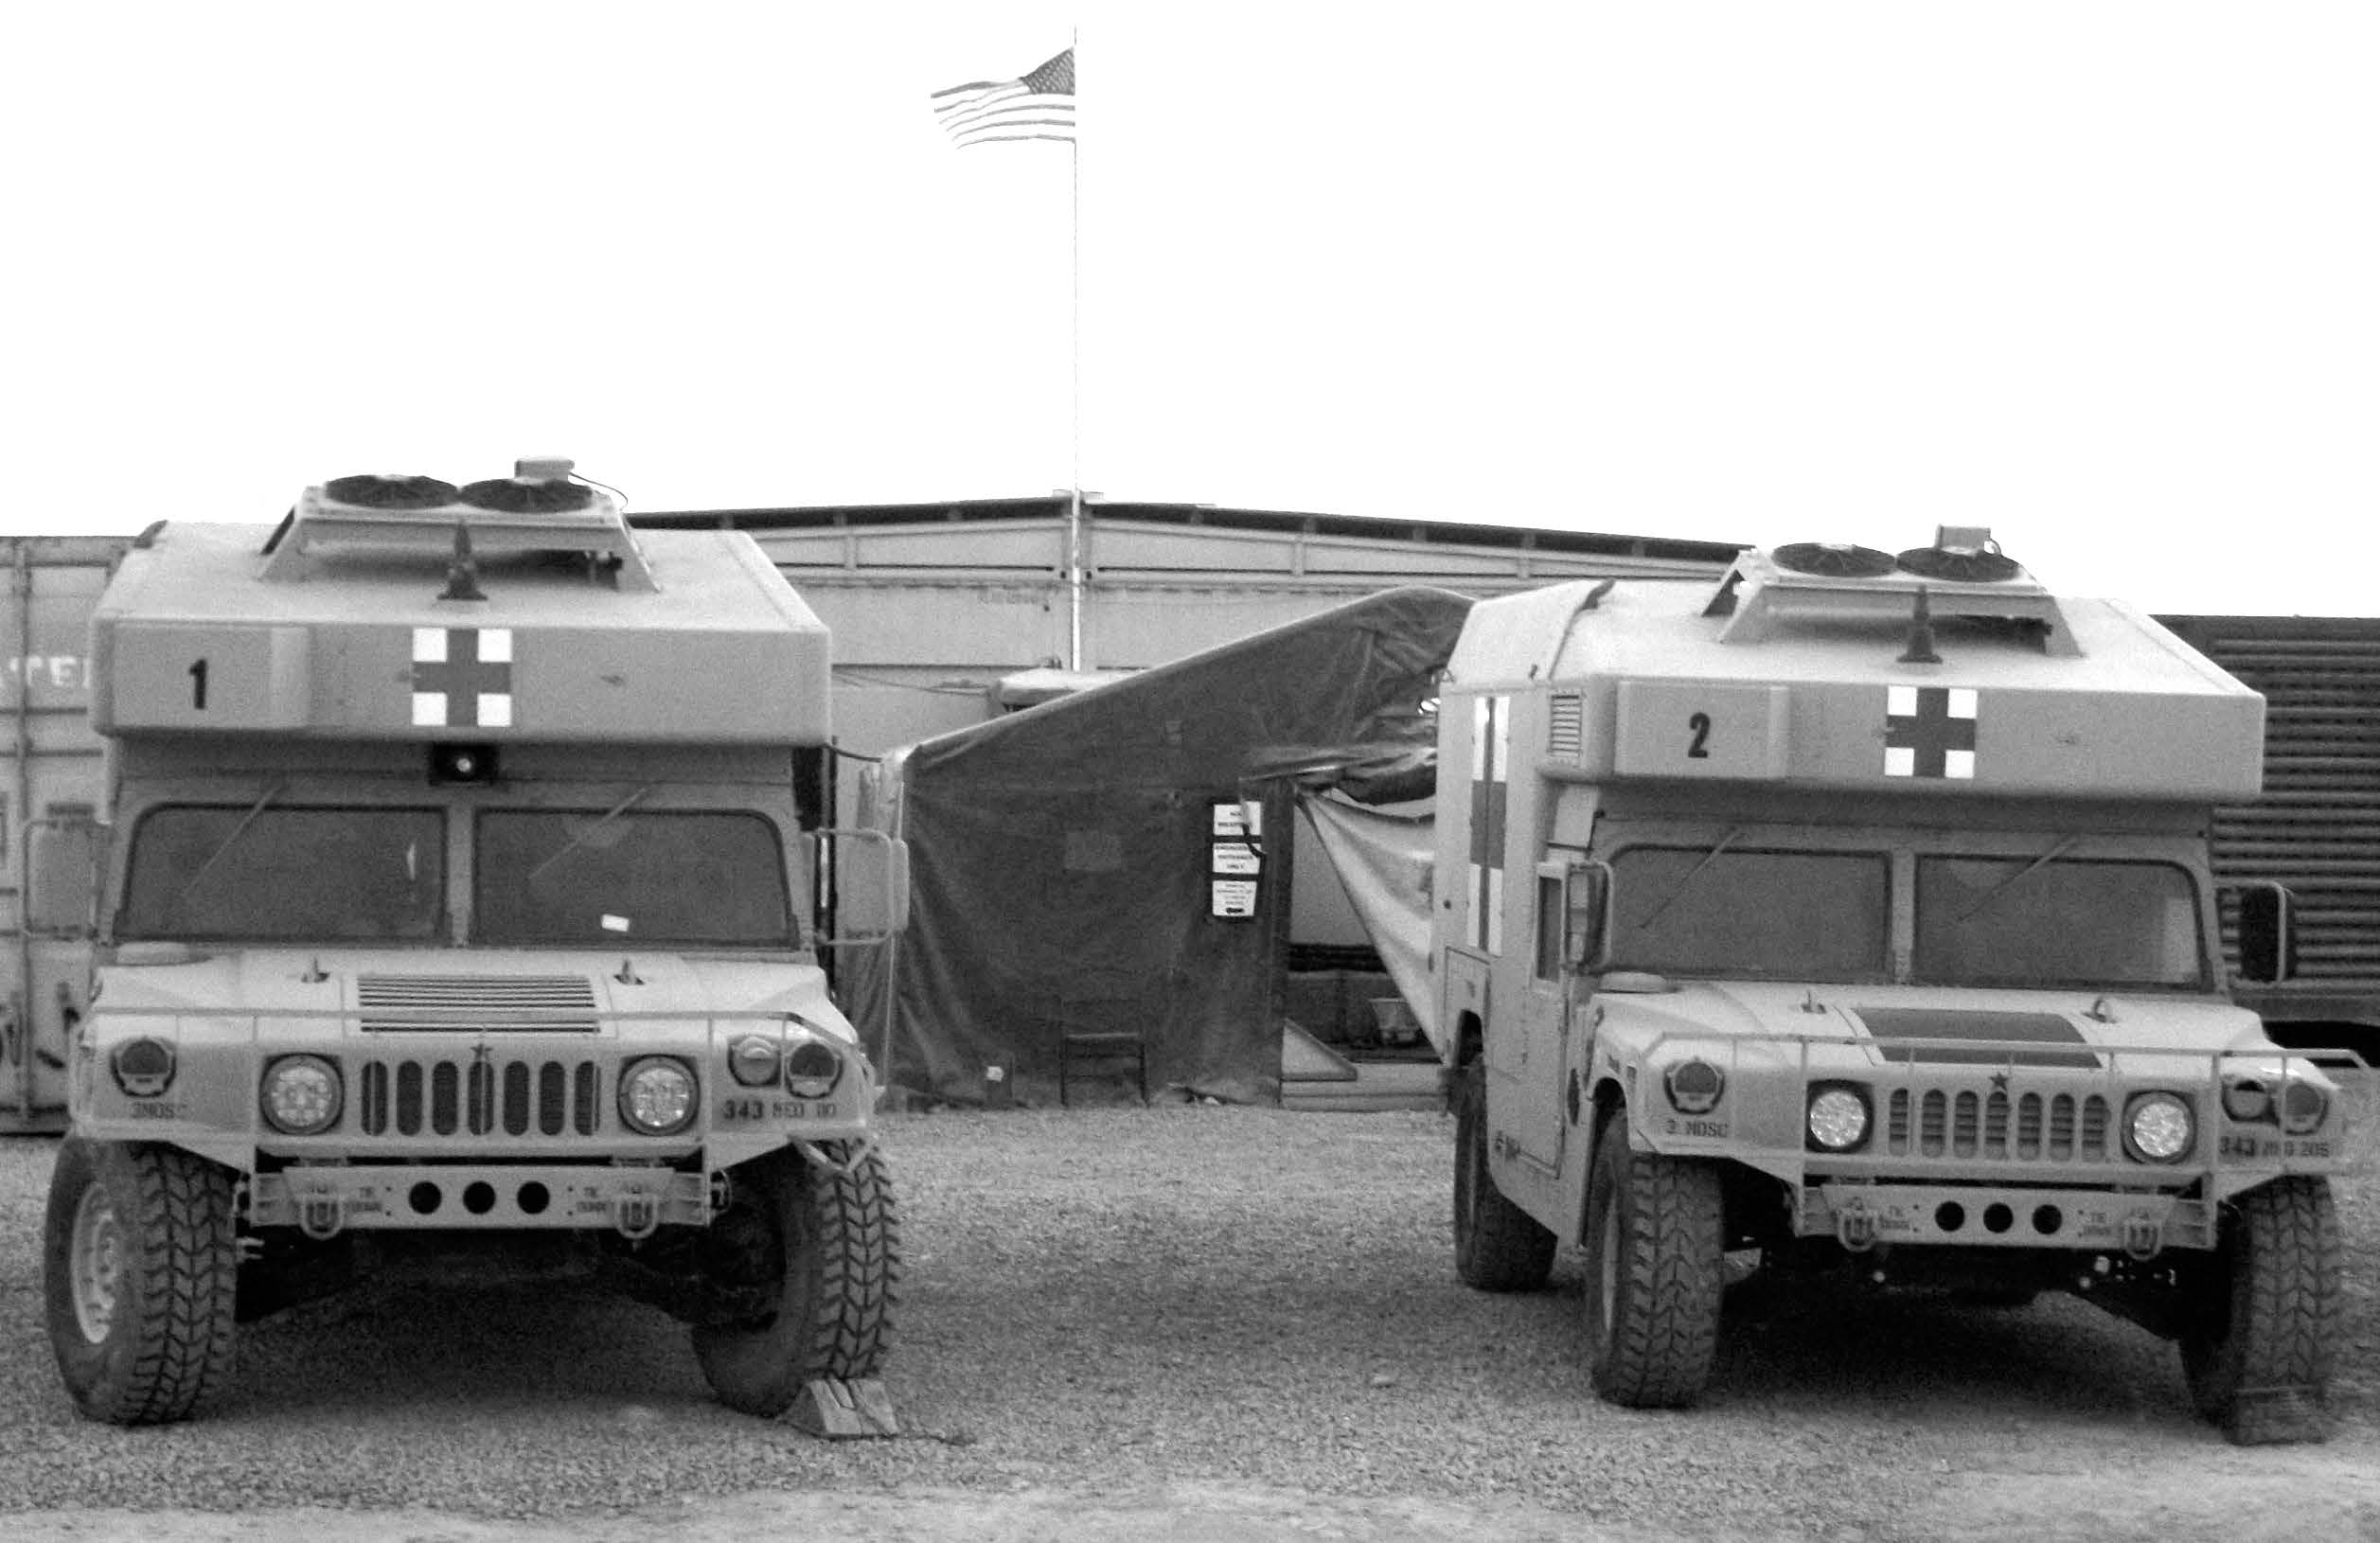 Two Humvees, modified to serve as ambulances, are pictured in front of U.S. Medical Role 2E Hospital at Camp Holland, Tarin Kowt, Afghanistan. Courtesy of Brady Cox.